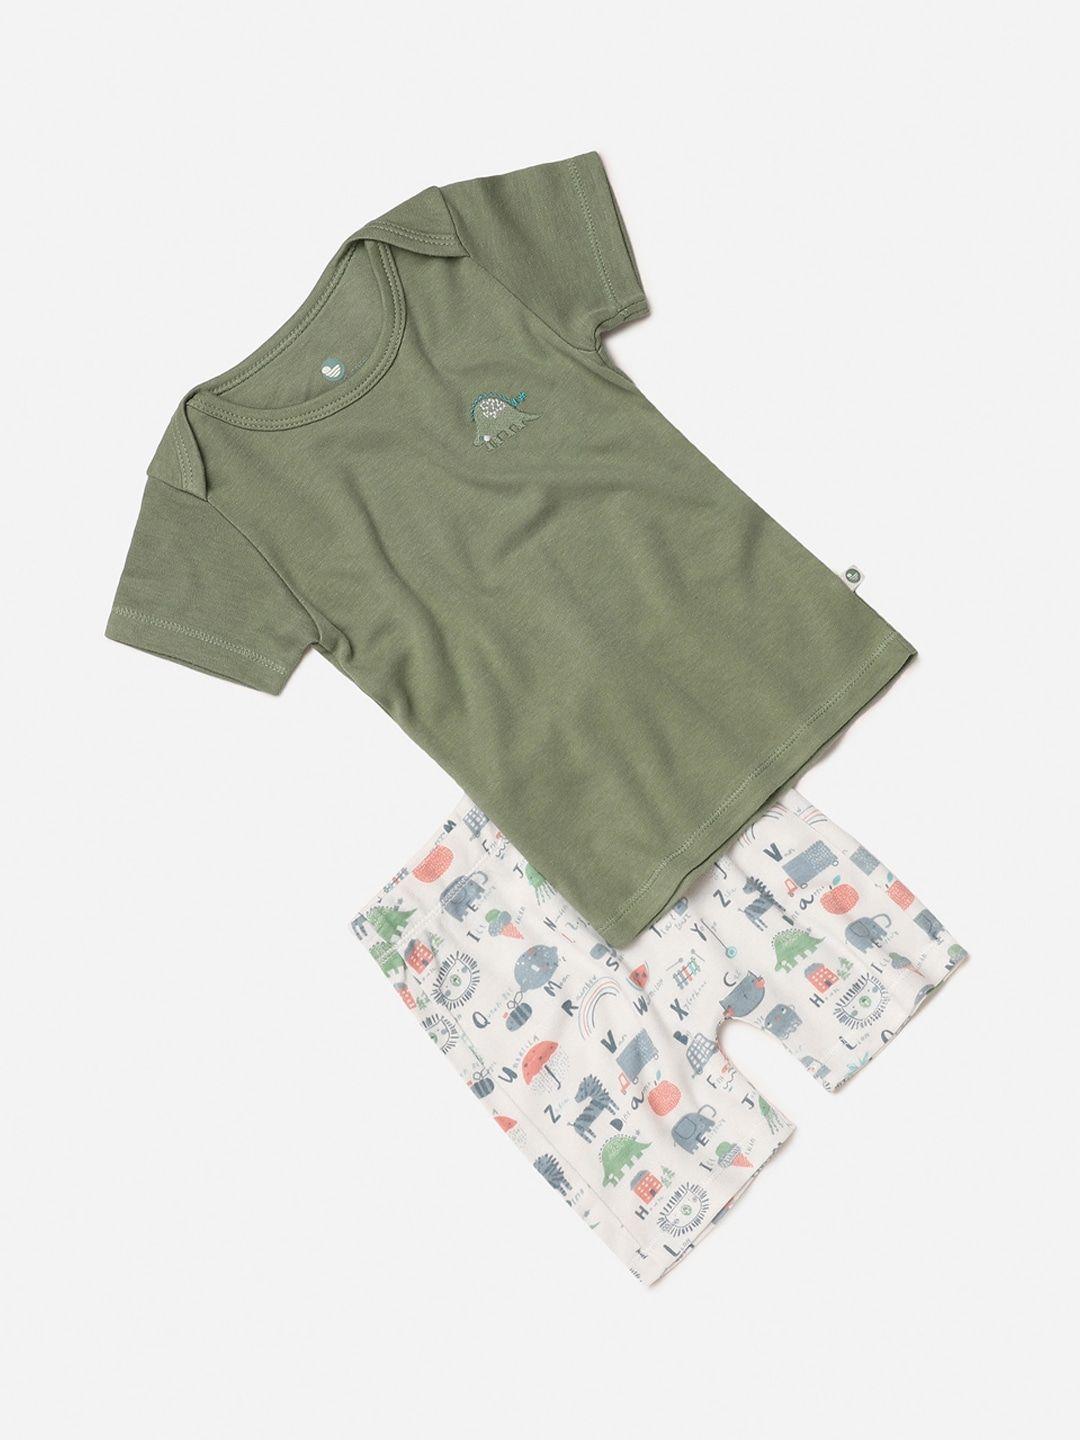 cocoon-care-kids-olive-green-&-white-printed-bamboo-t-shirt-with-shorts